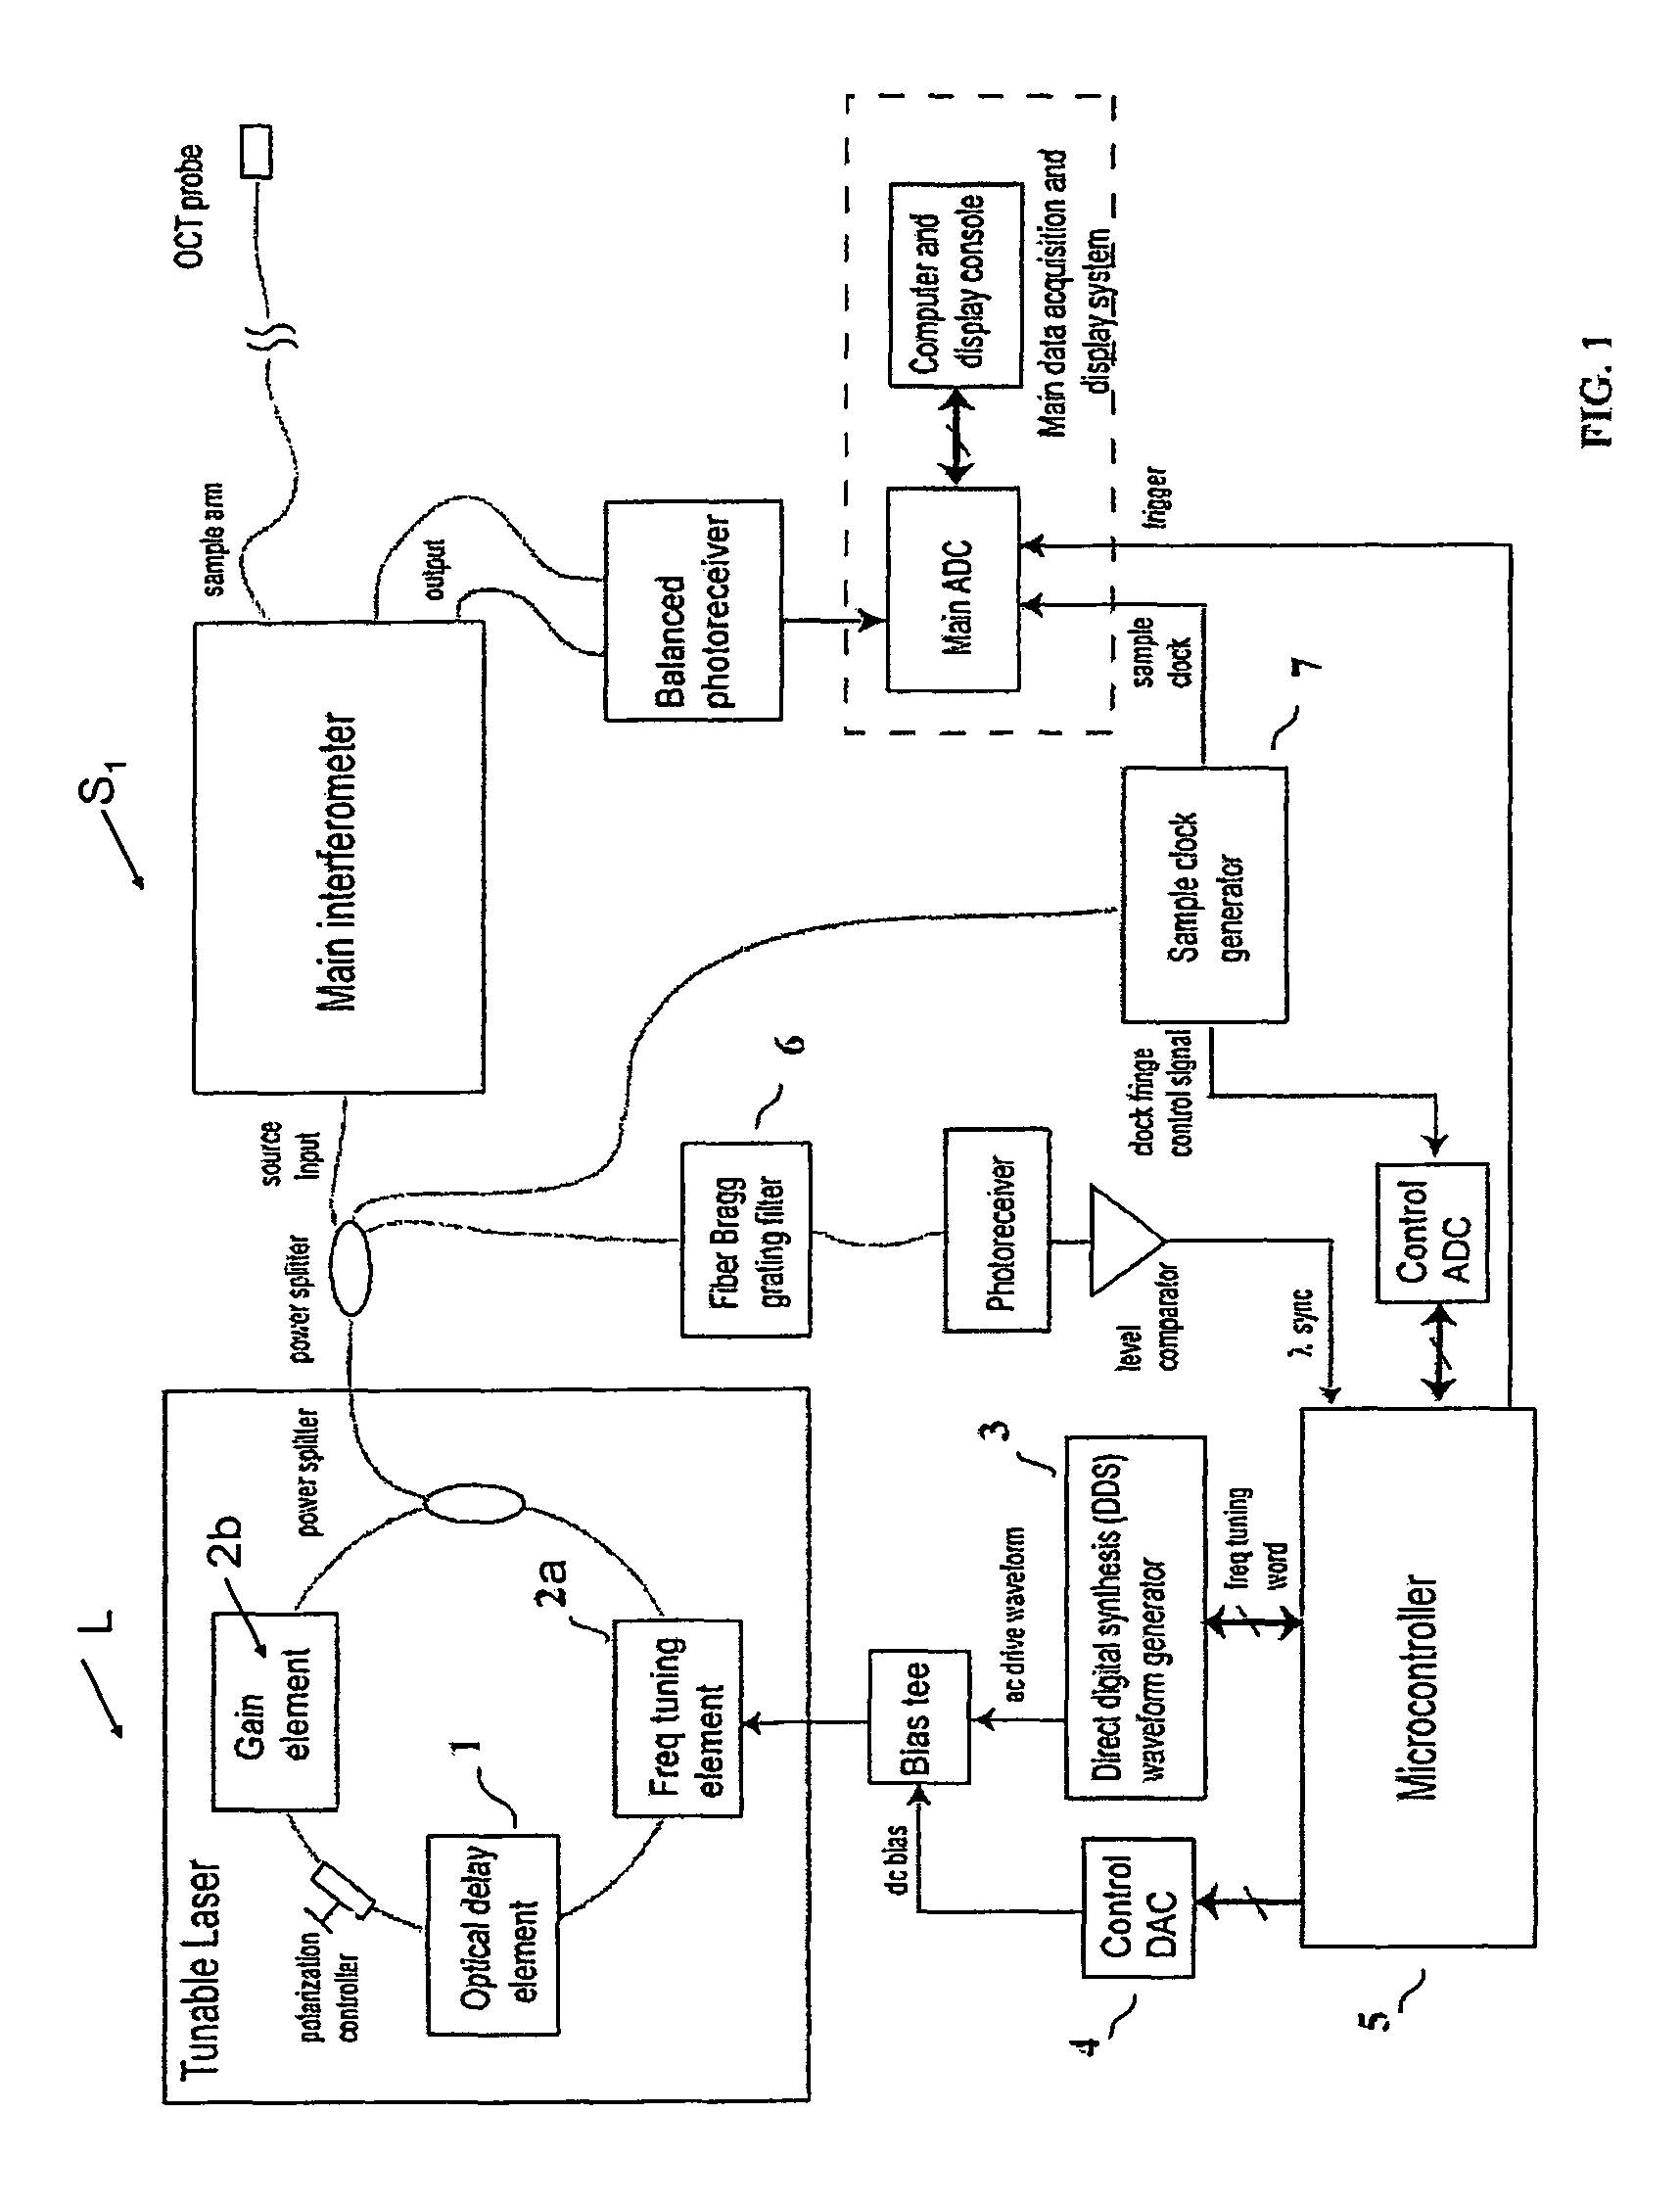 Methods and apparatus for swept-source optical coherence tomography